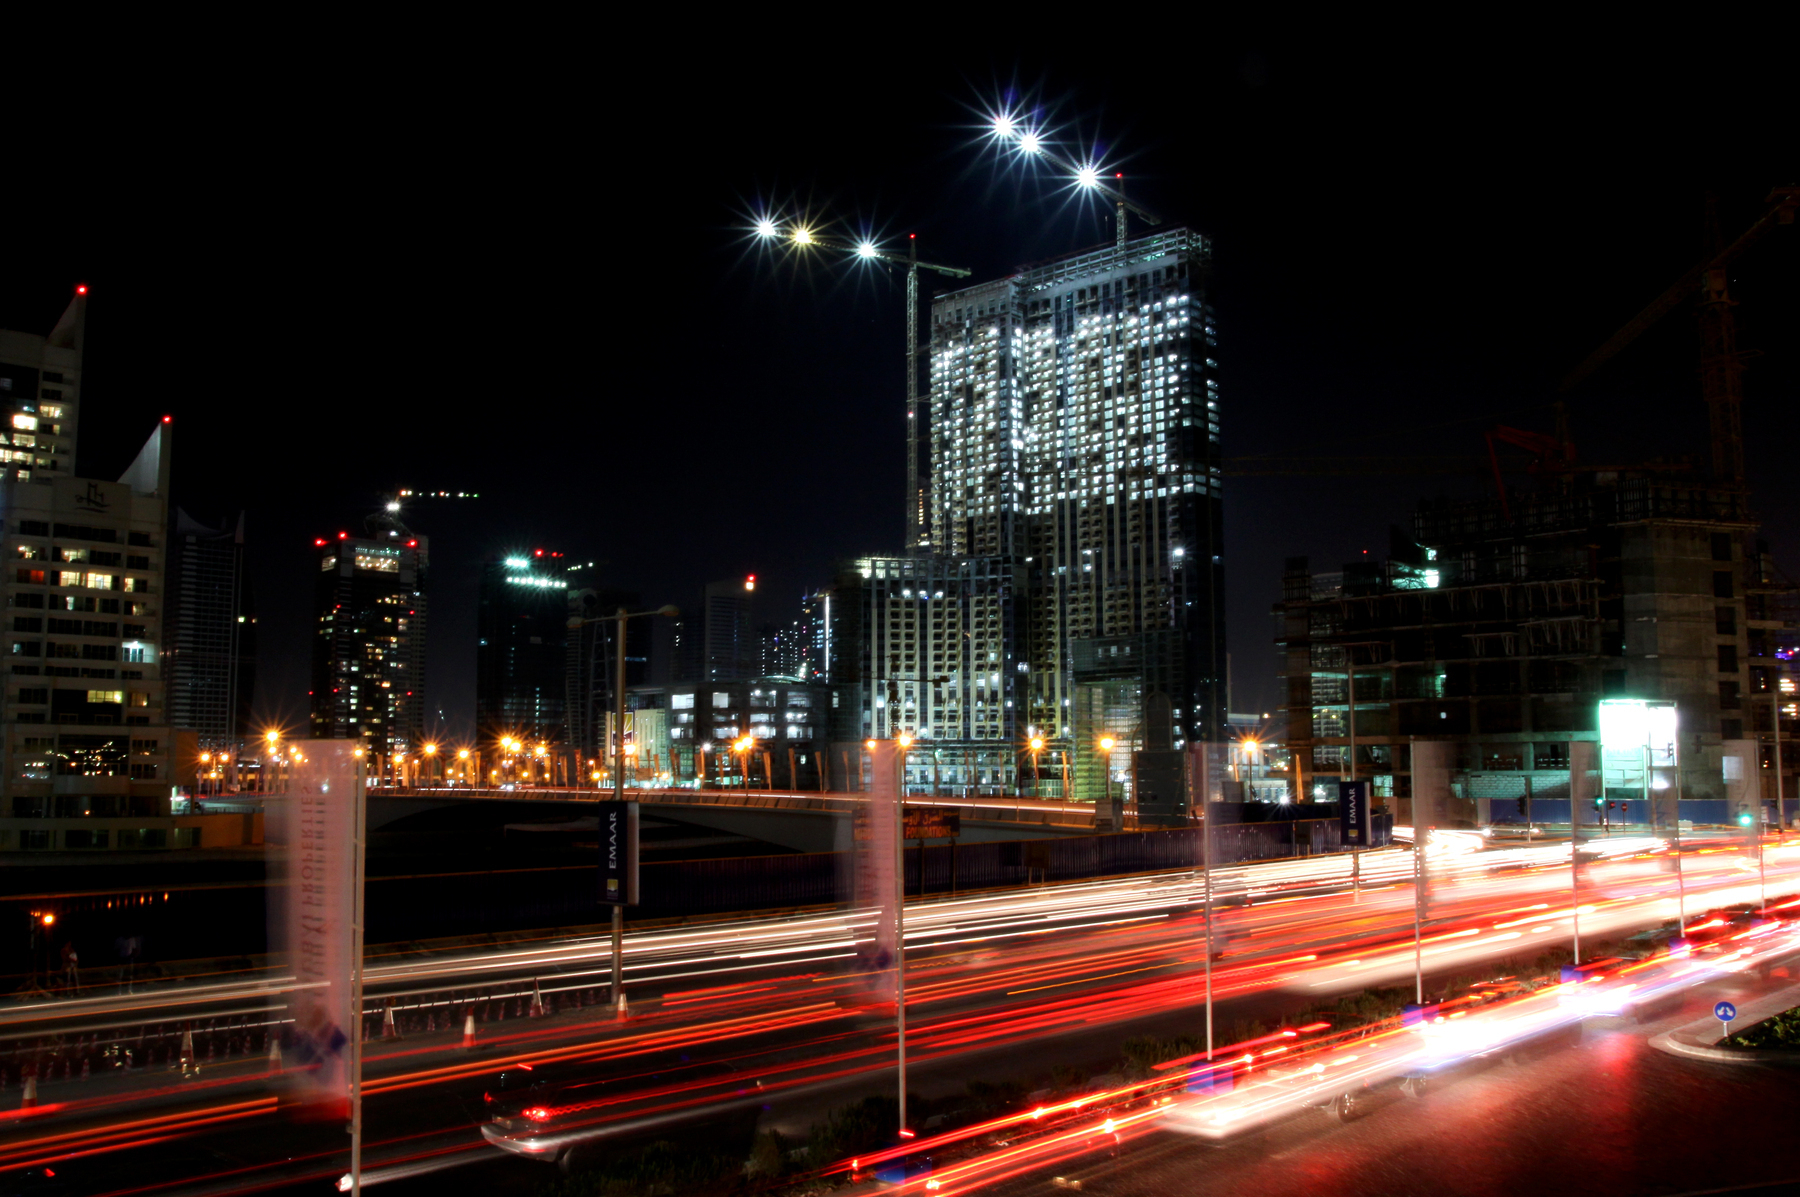 a digital photograph of a time lapse scene of Sheikh Zayed Road in Dubai with lots of construction and lights